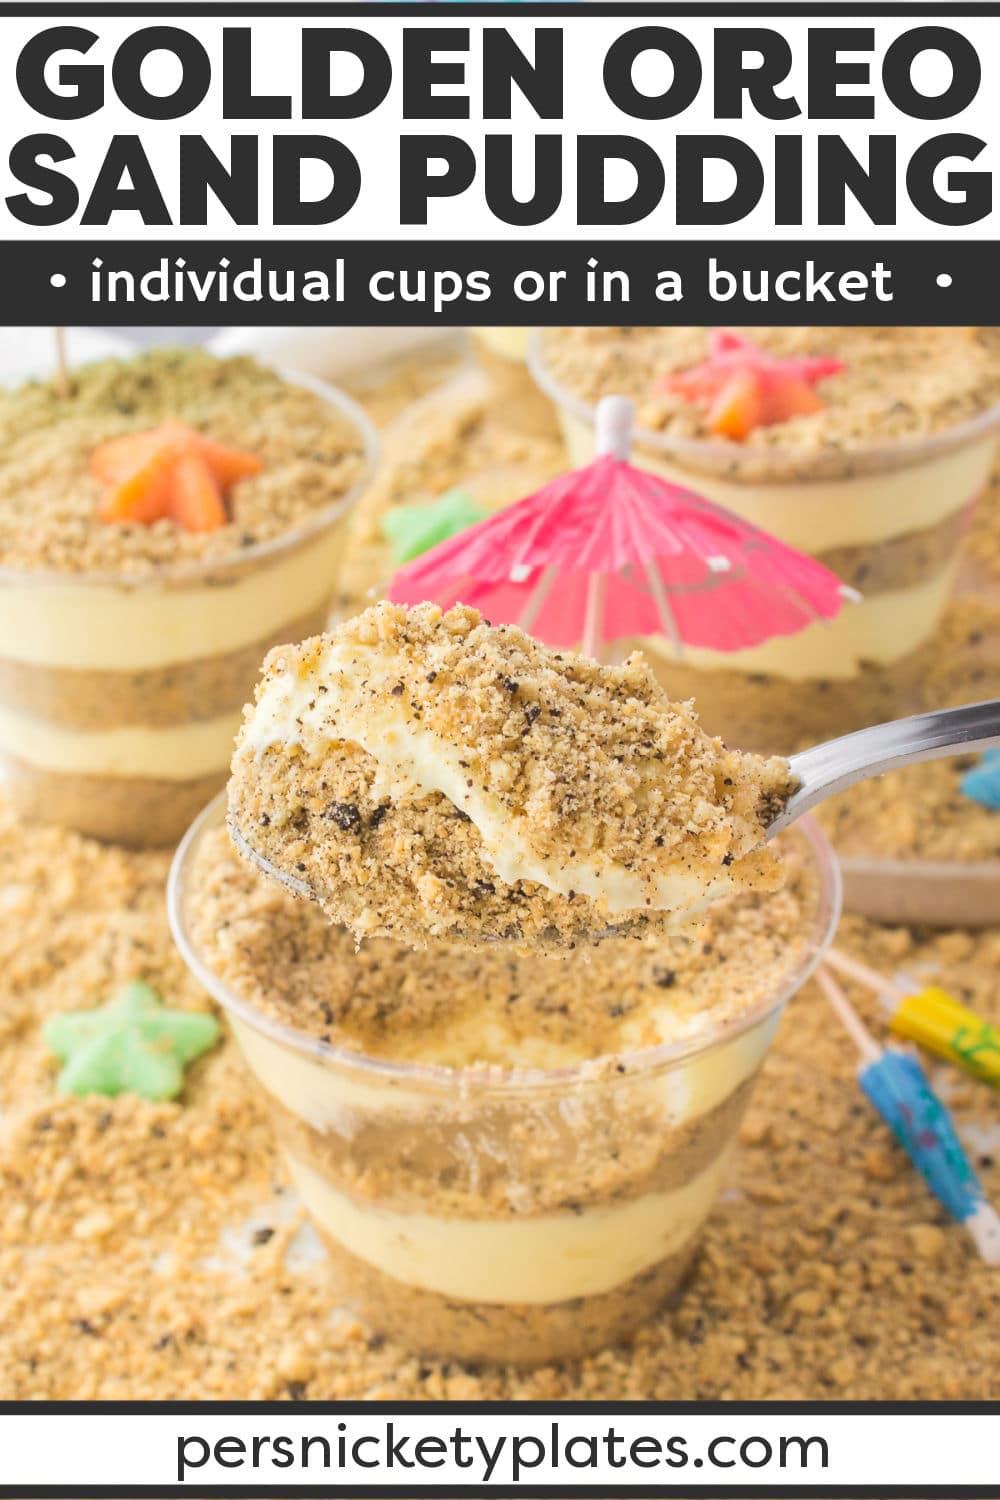 Golden Oreo Sand Pudding is such a fun summer treat! You make Oreo cookie "sand" and layer it with pudding to create a beach themed dessert that looks just like sand. Serve it out of a bucket for a crowd or individual pudding cups. | www.persnicketyplates.com